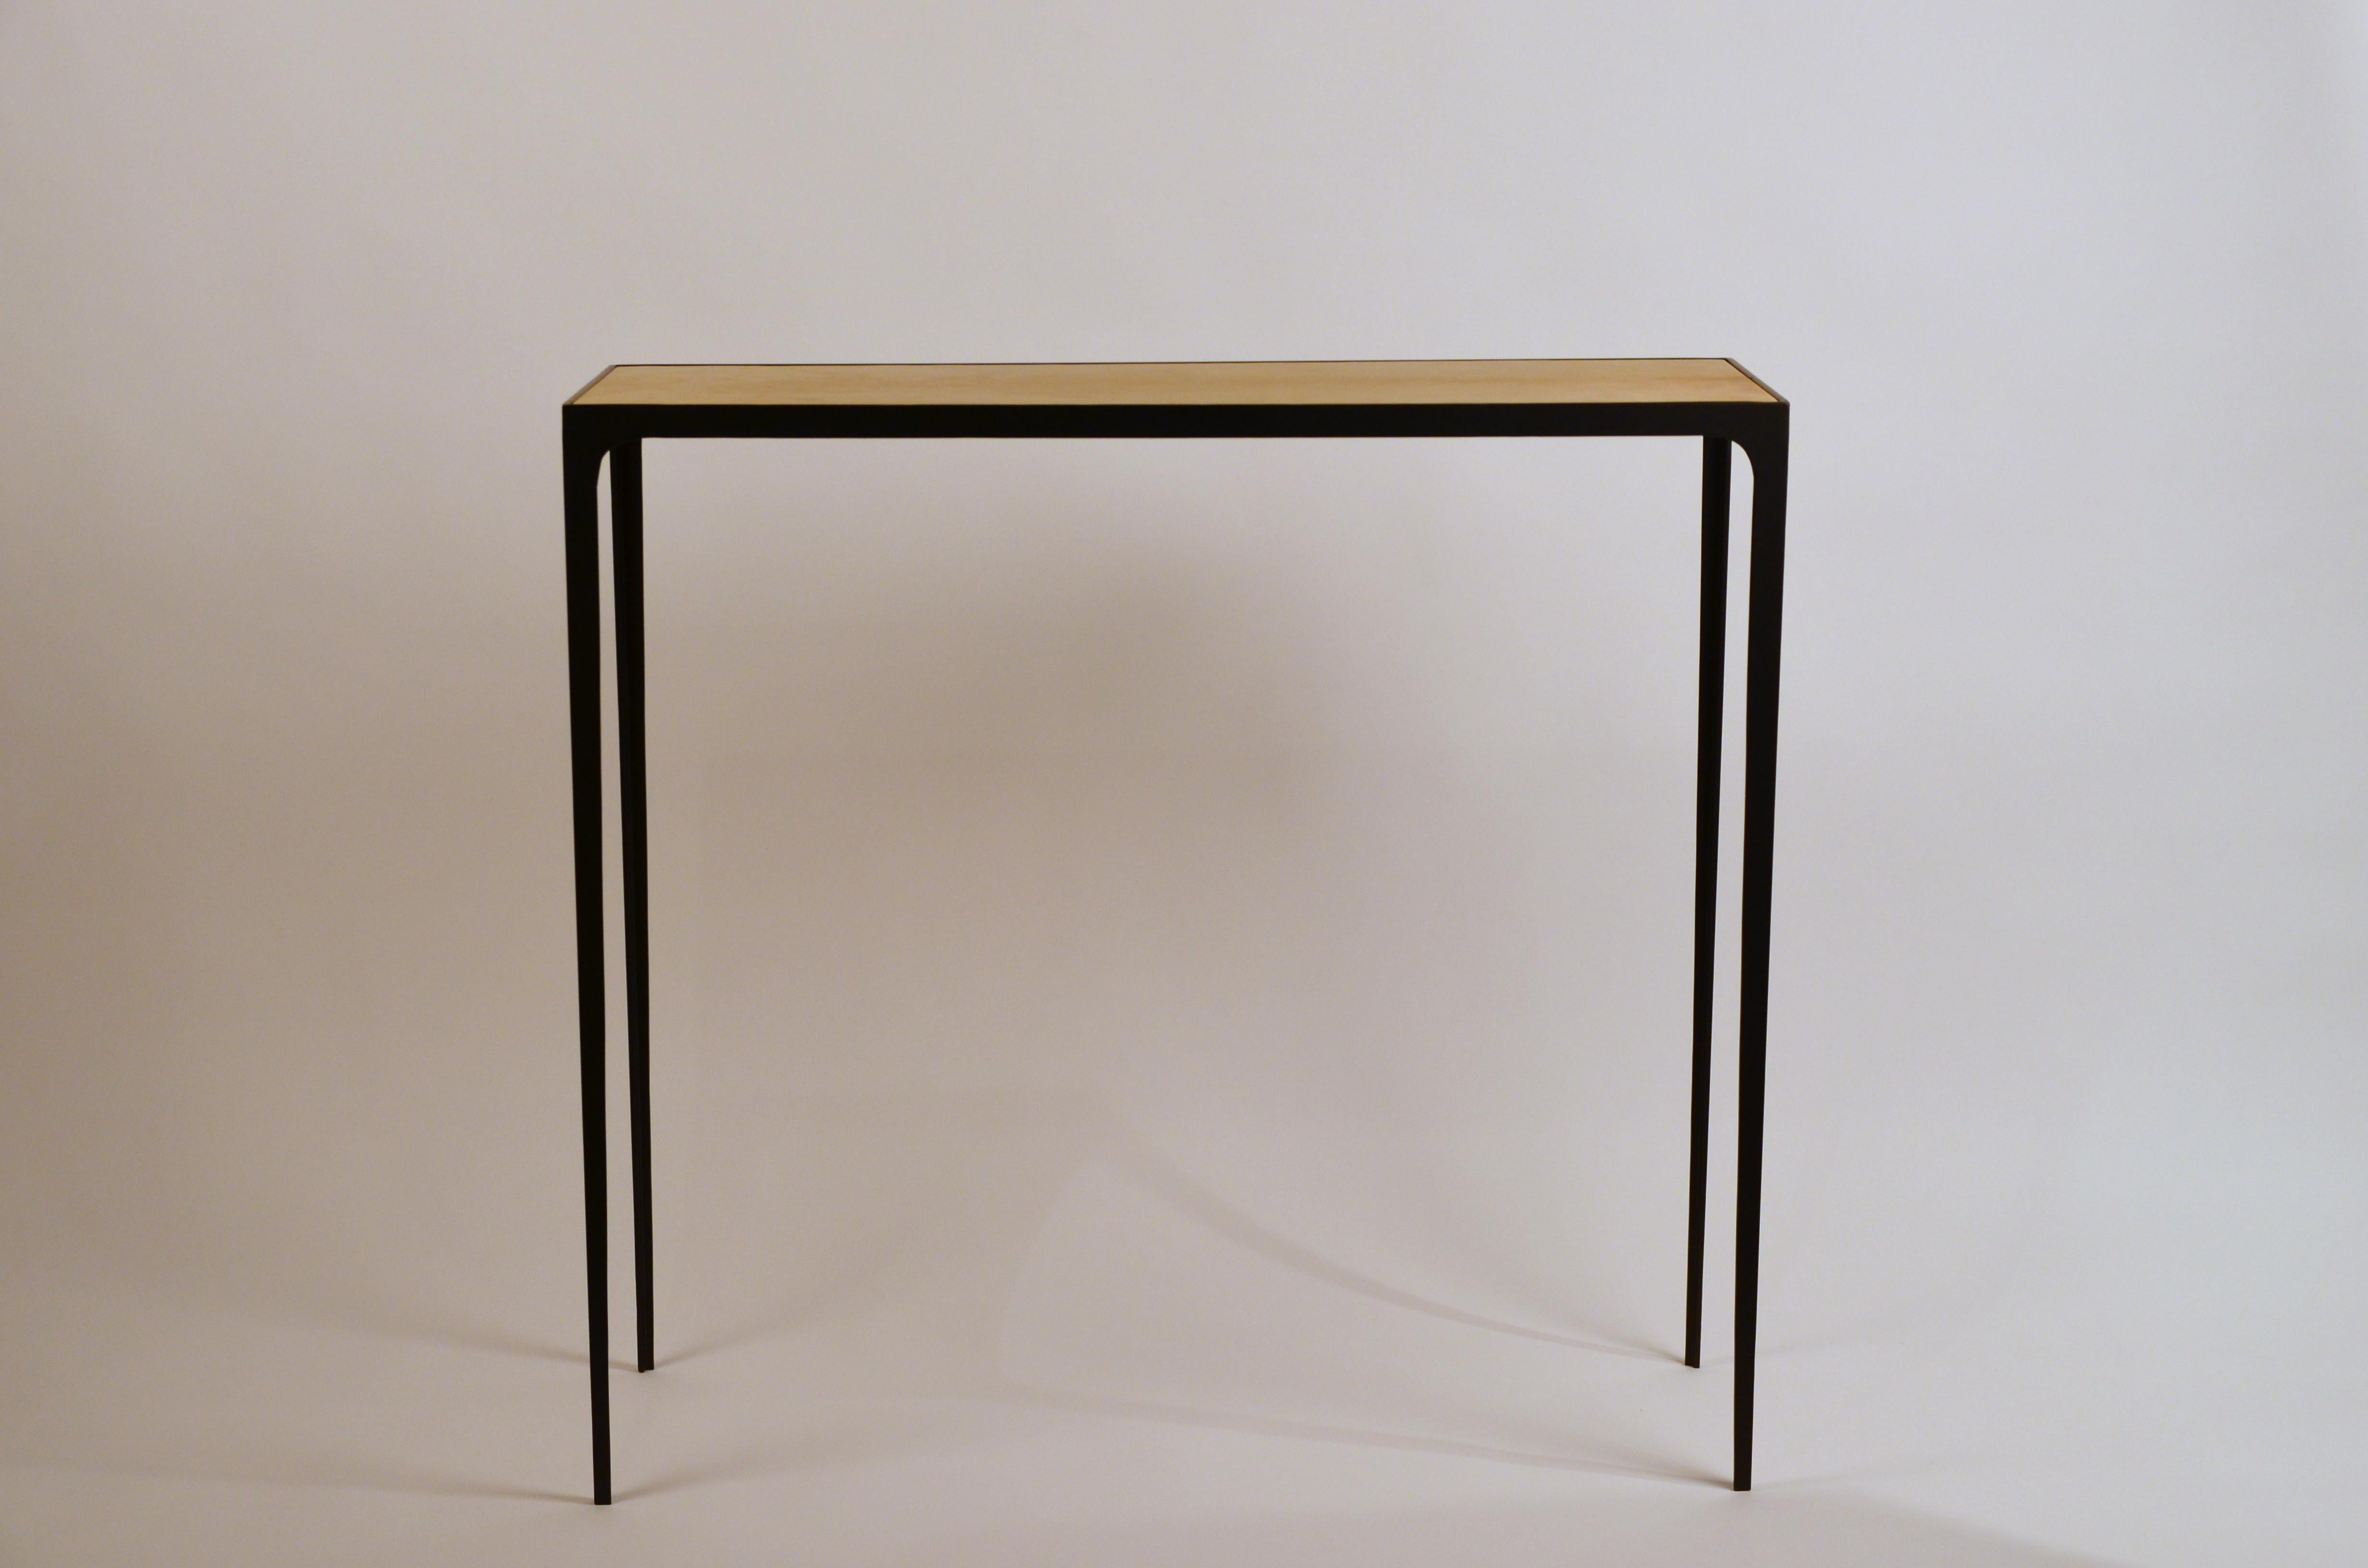 Wide 'Esquisse' natural parchment and wrought iron console by Design Frères.

Chic handmade natural parchment top paired with a slender blackened wrought iron base.